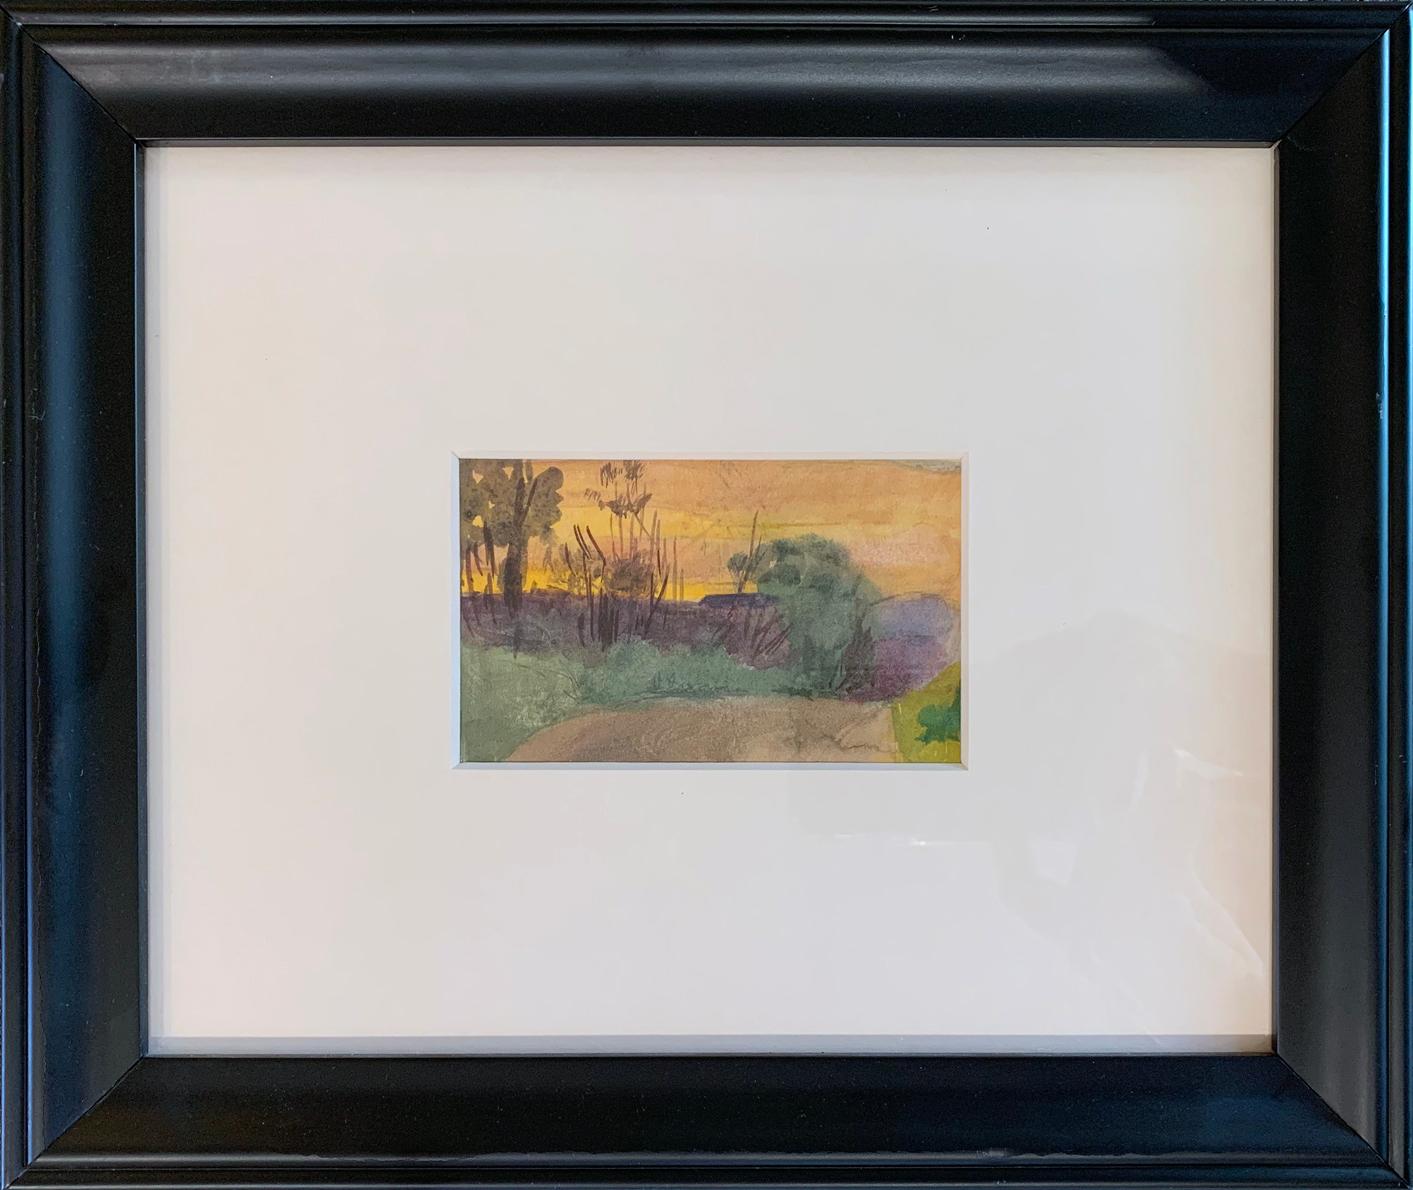 Sunset Landscape, American Impressionist, Miniature Watercolor Painting, 1899 - Art by Henry Bayley Snell